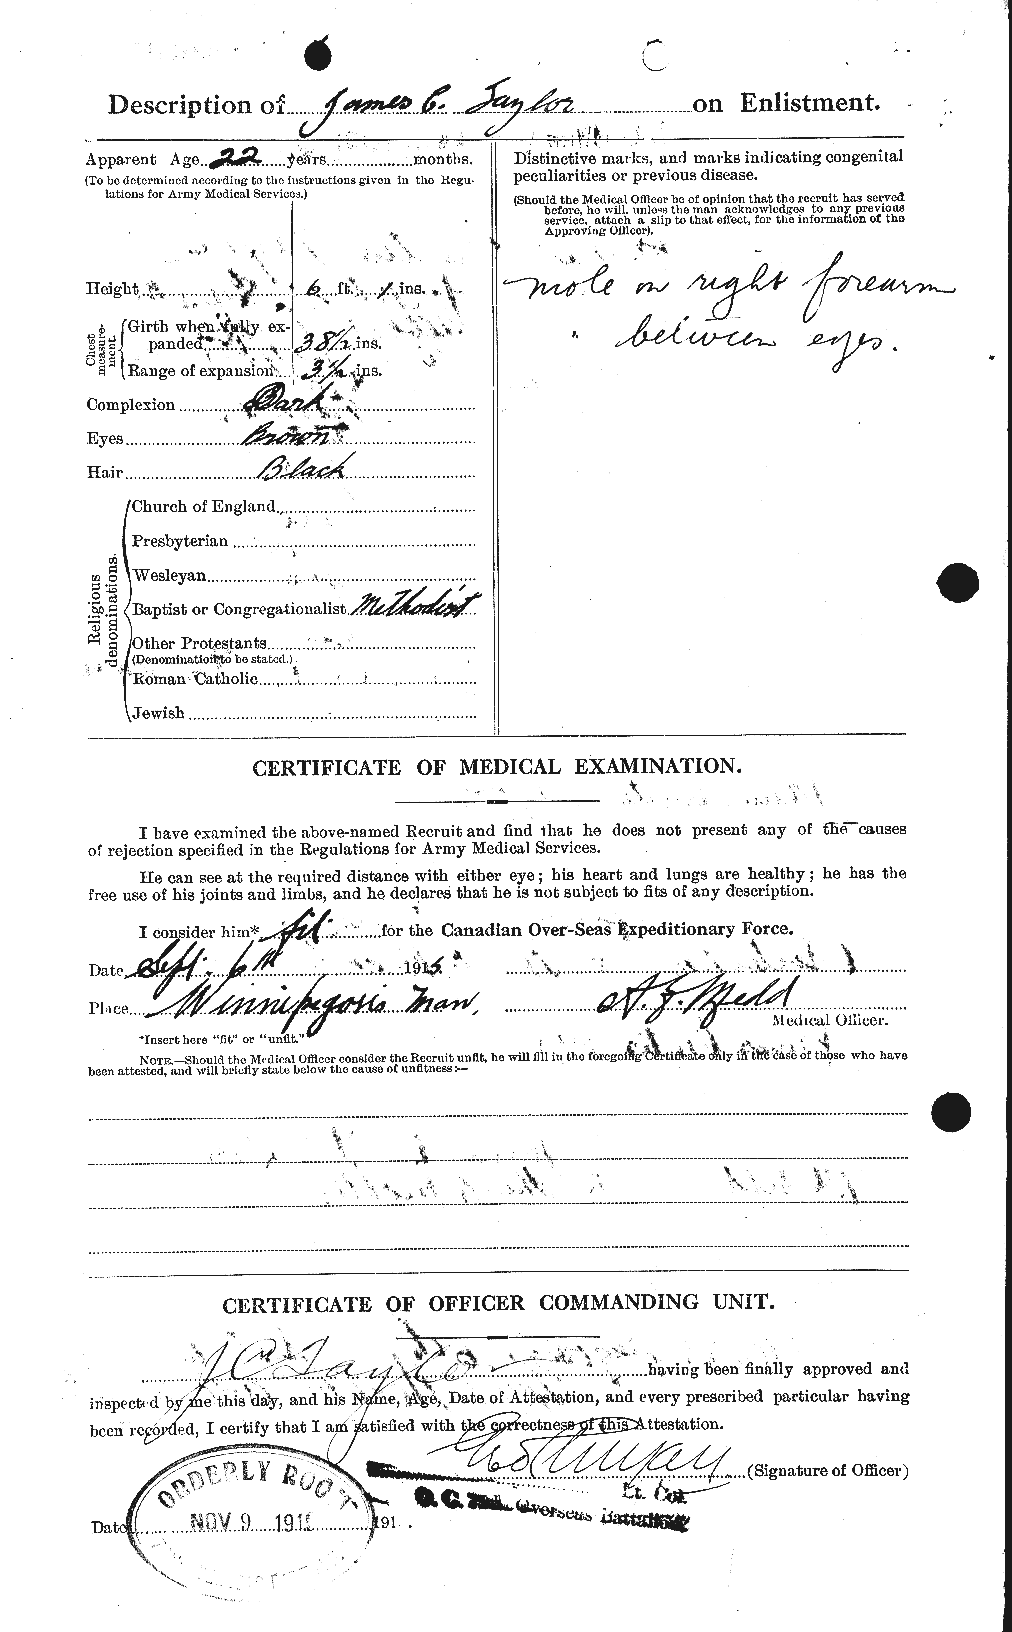 Personnel Records of the First World War - CEF 626911b